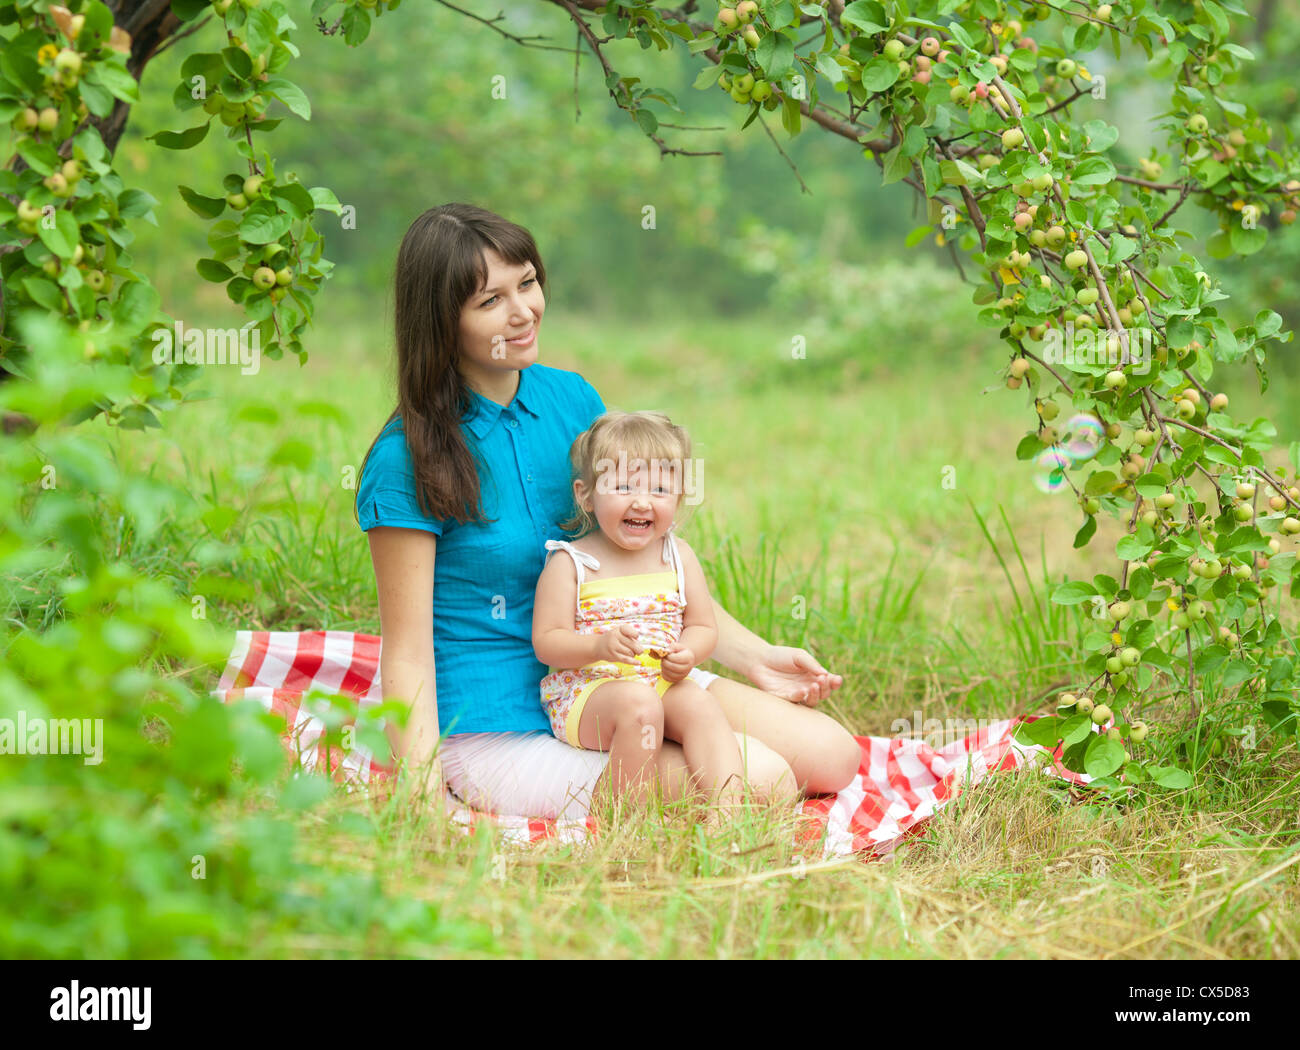 mother and daughter have picnic outdoor under apple tree branch Stock Photo